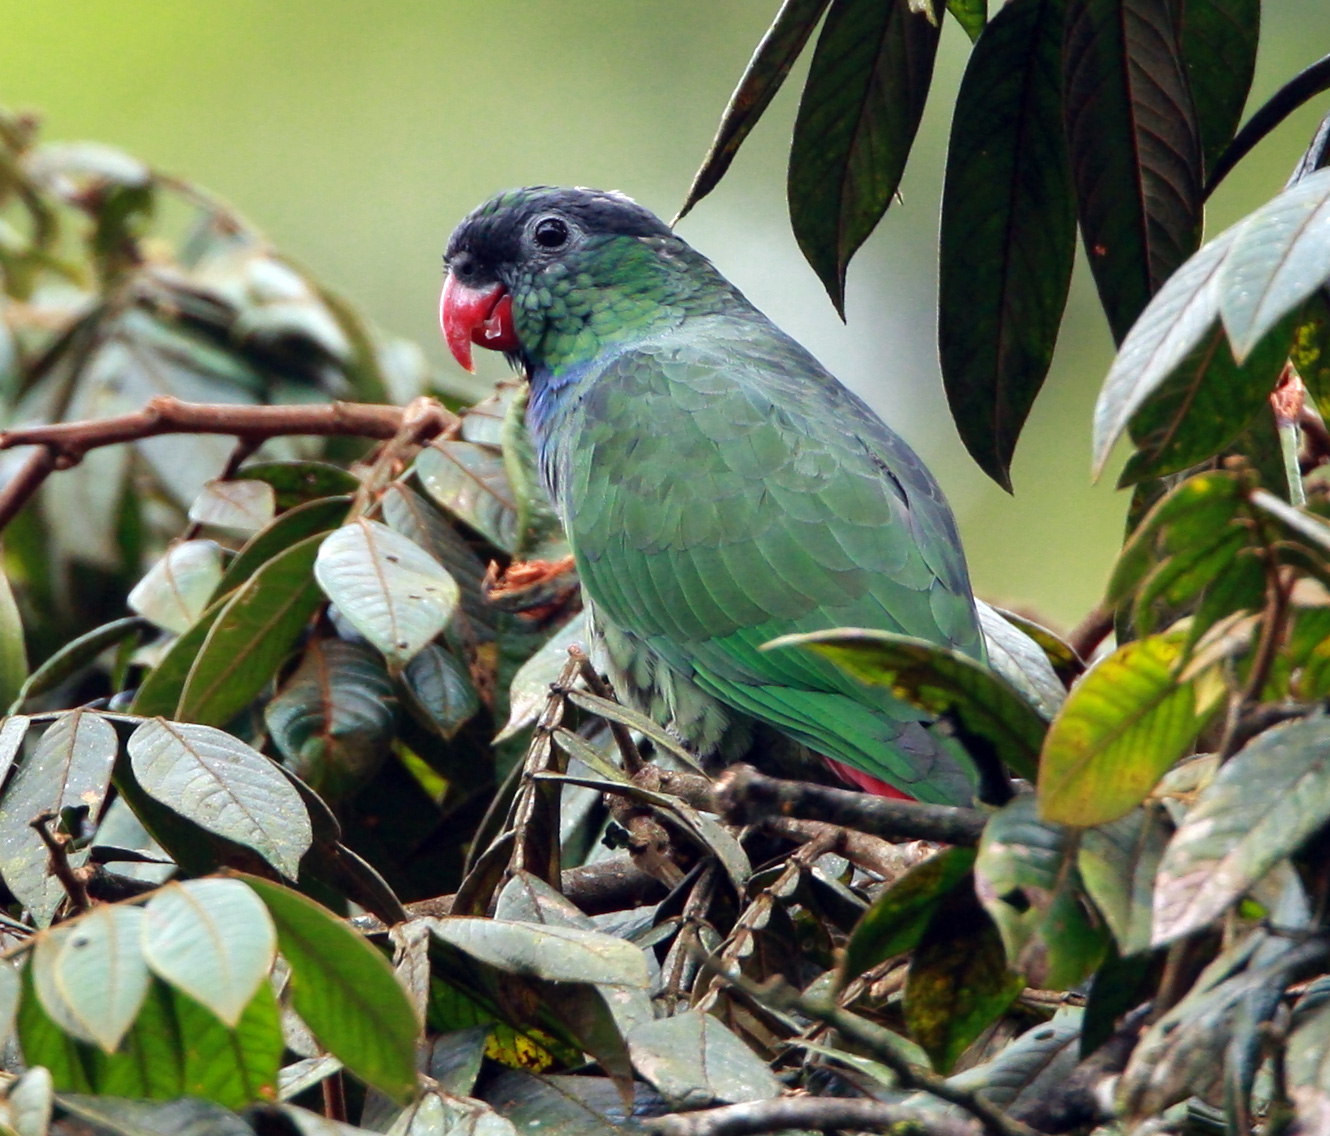 RED-BILLED PARROT